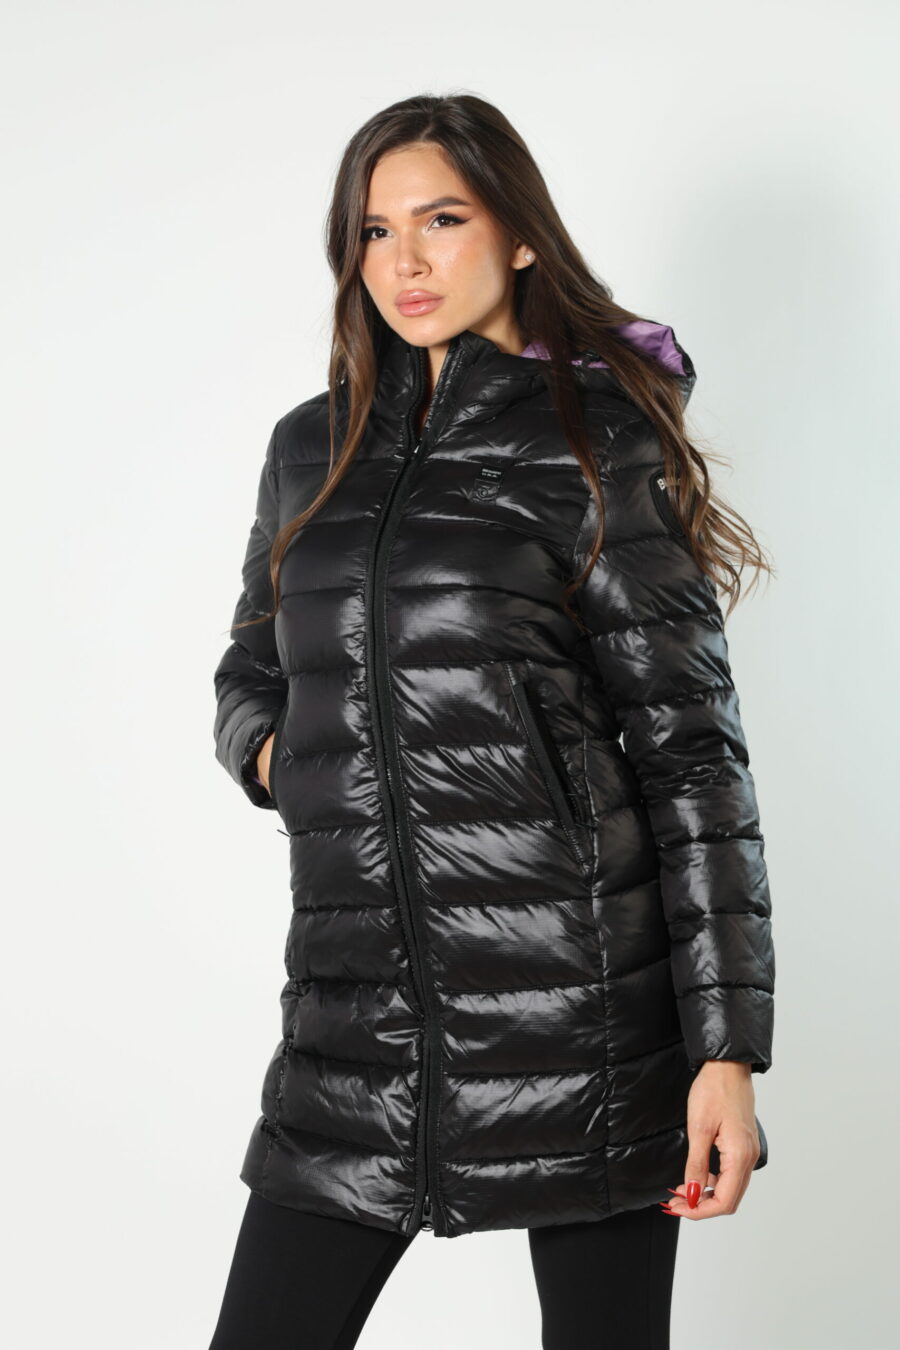 Long black waterproof mackintosh with hood and straight lines with violet lining - 8052865435499 123 scaled